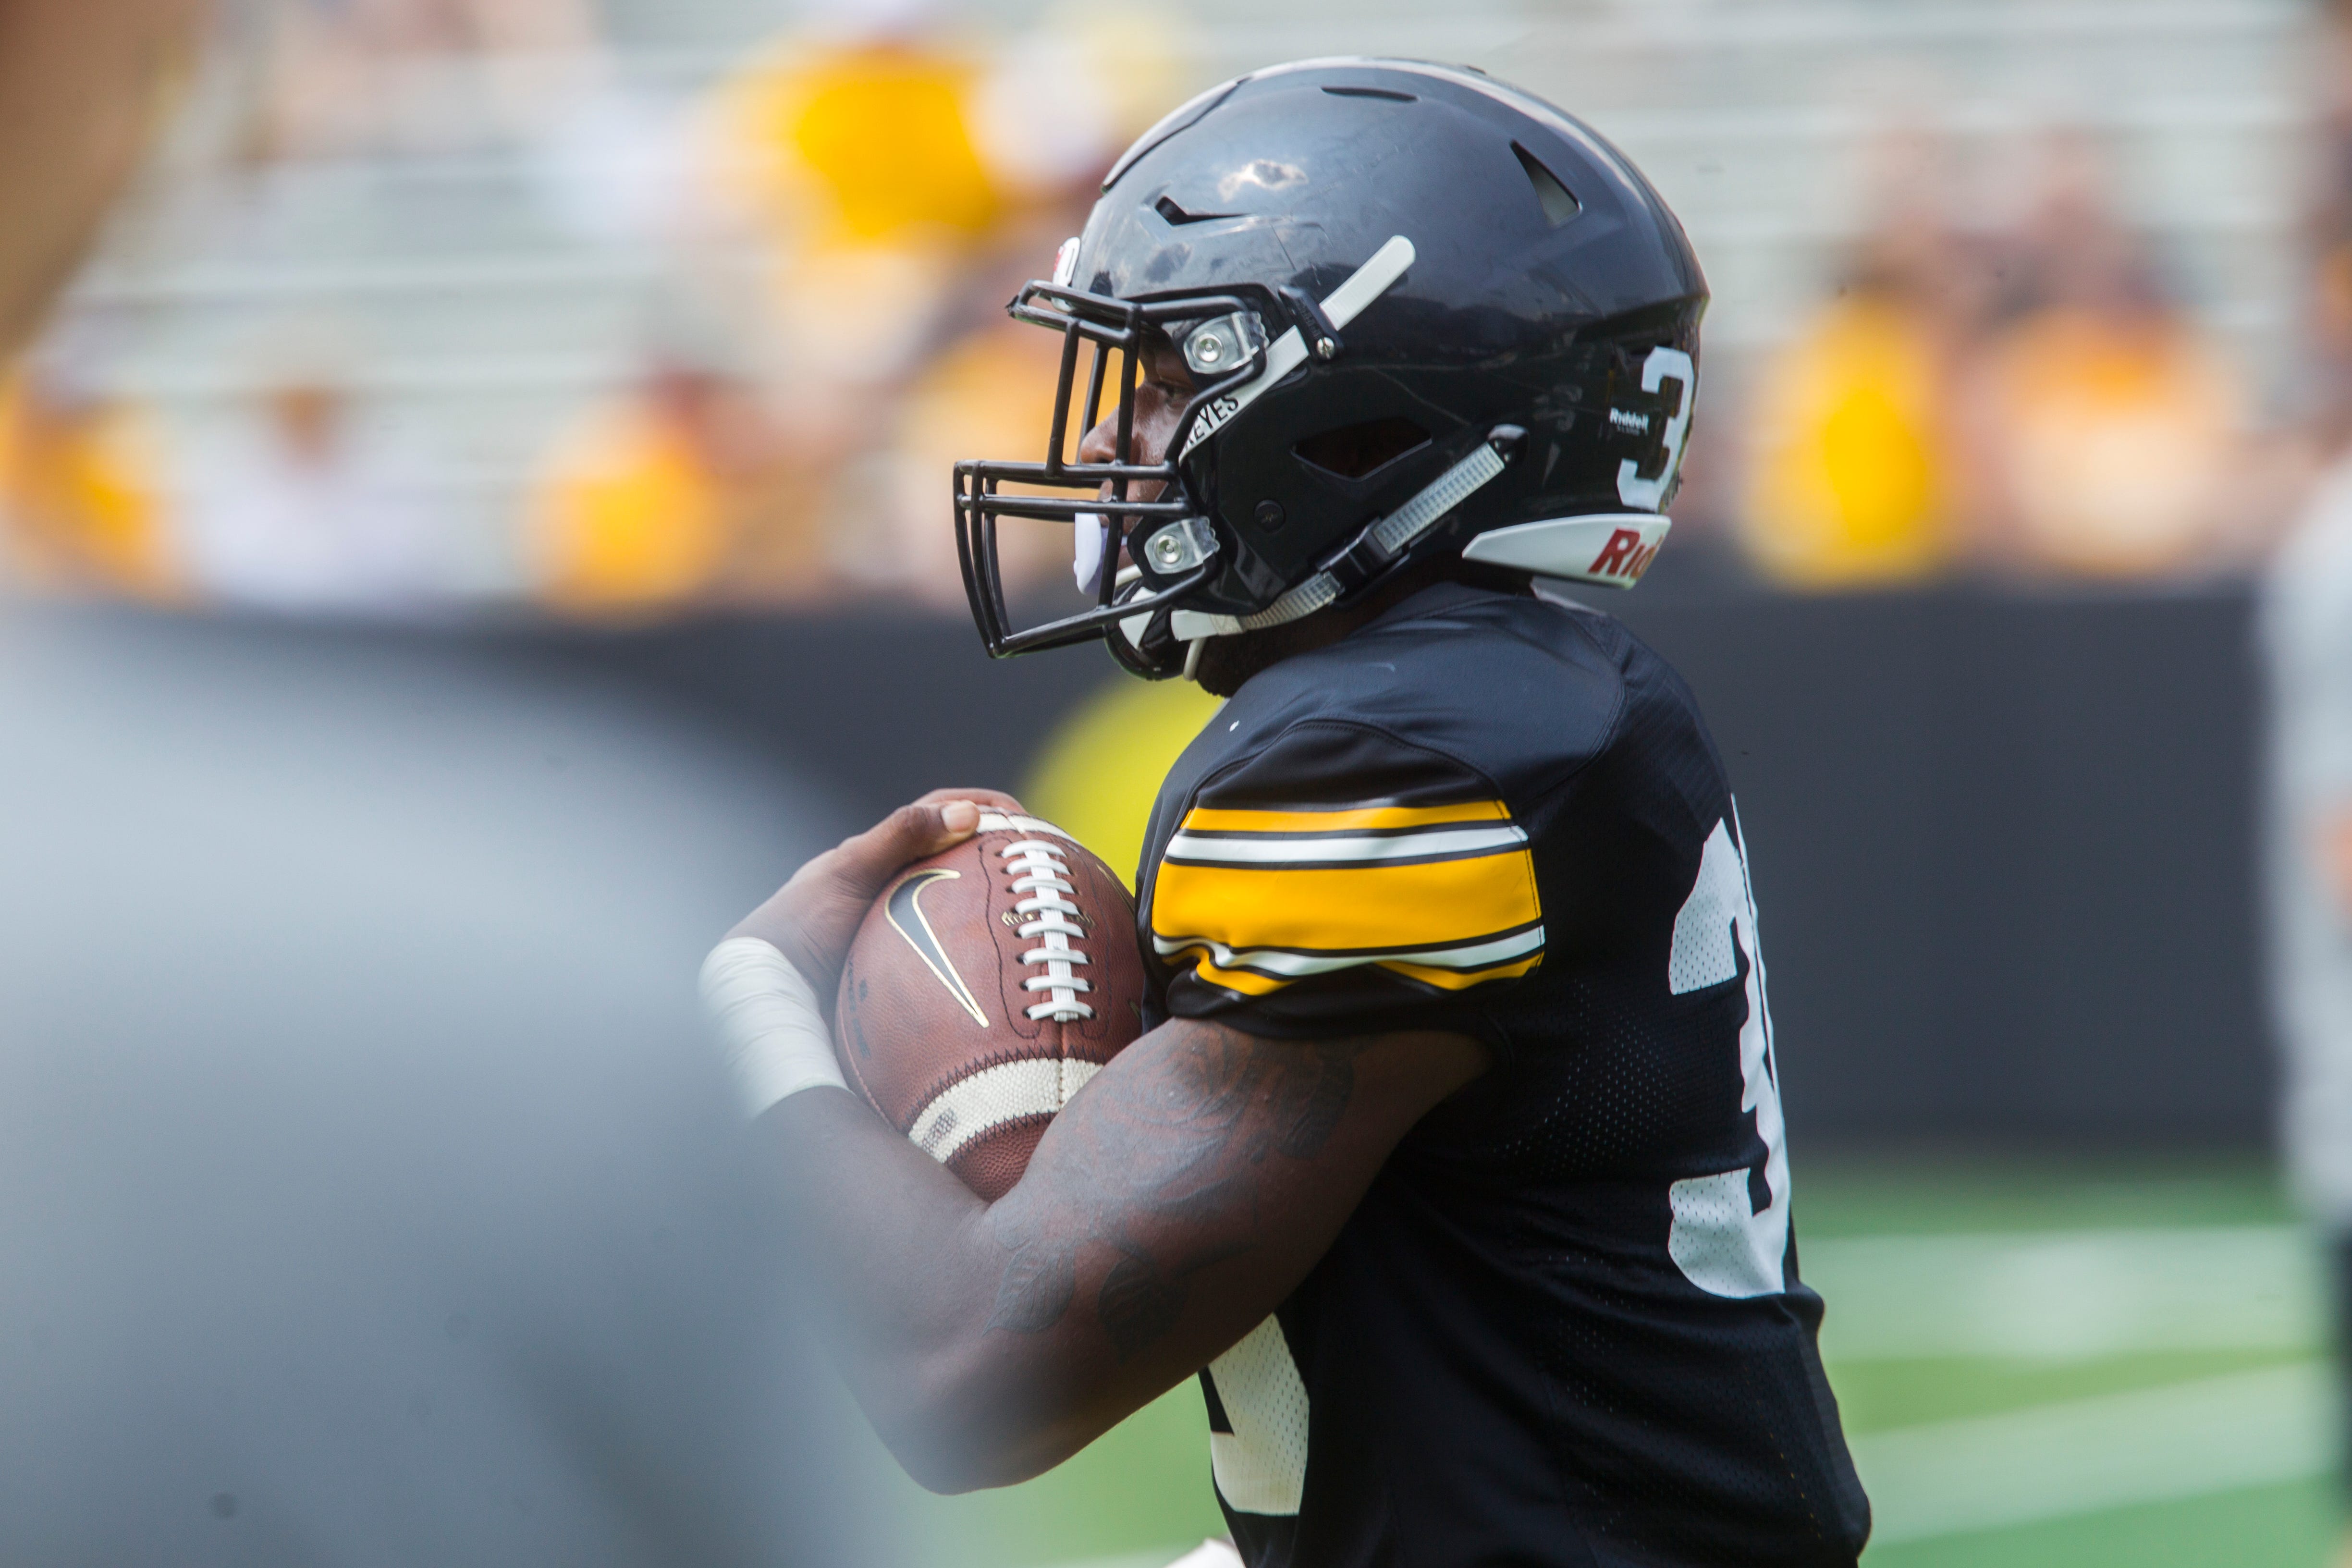 Iowa running back Henry Geil rushes during a Kids Day practice on Saturday, Aug. 11, 2018, at Kinnick Stadium in Iowa City.